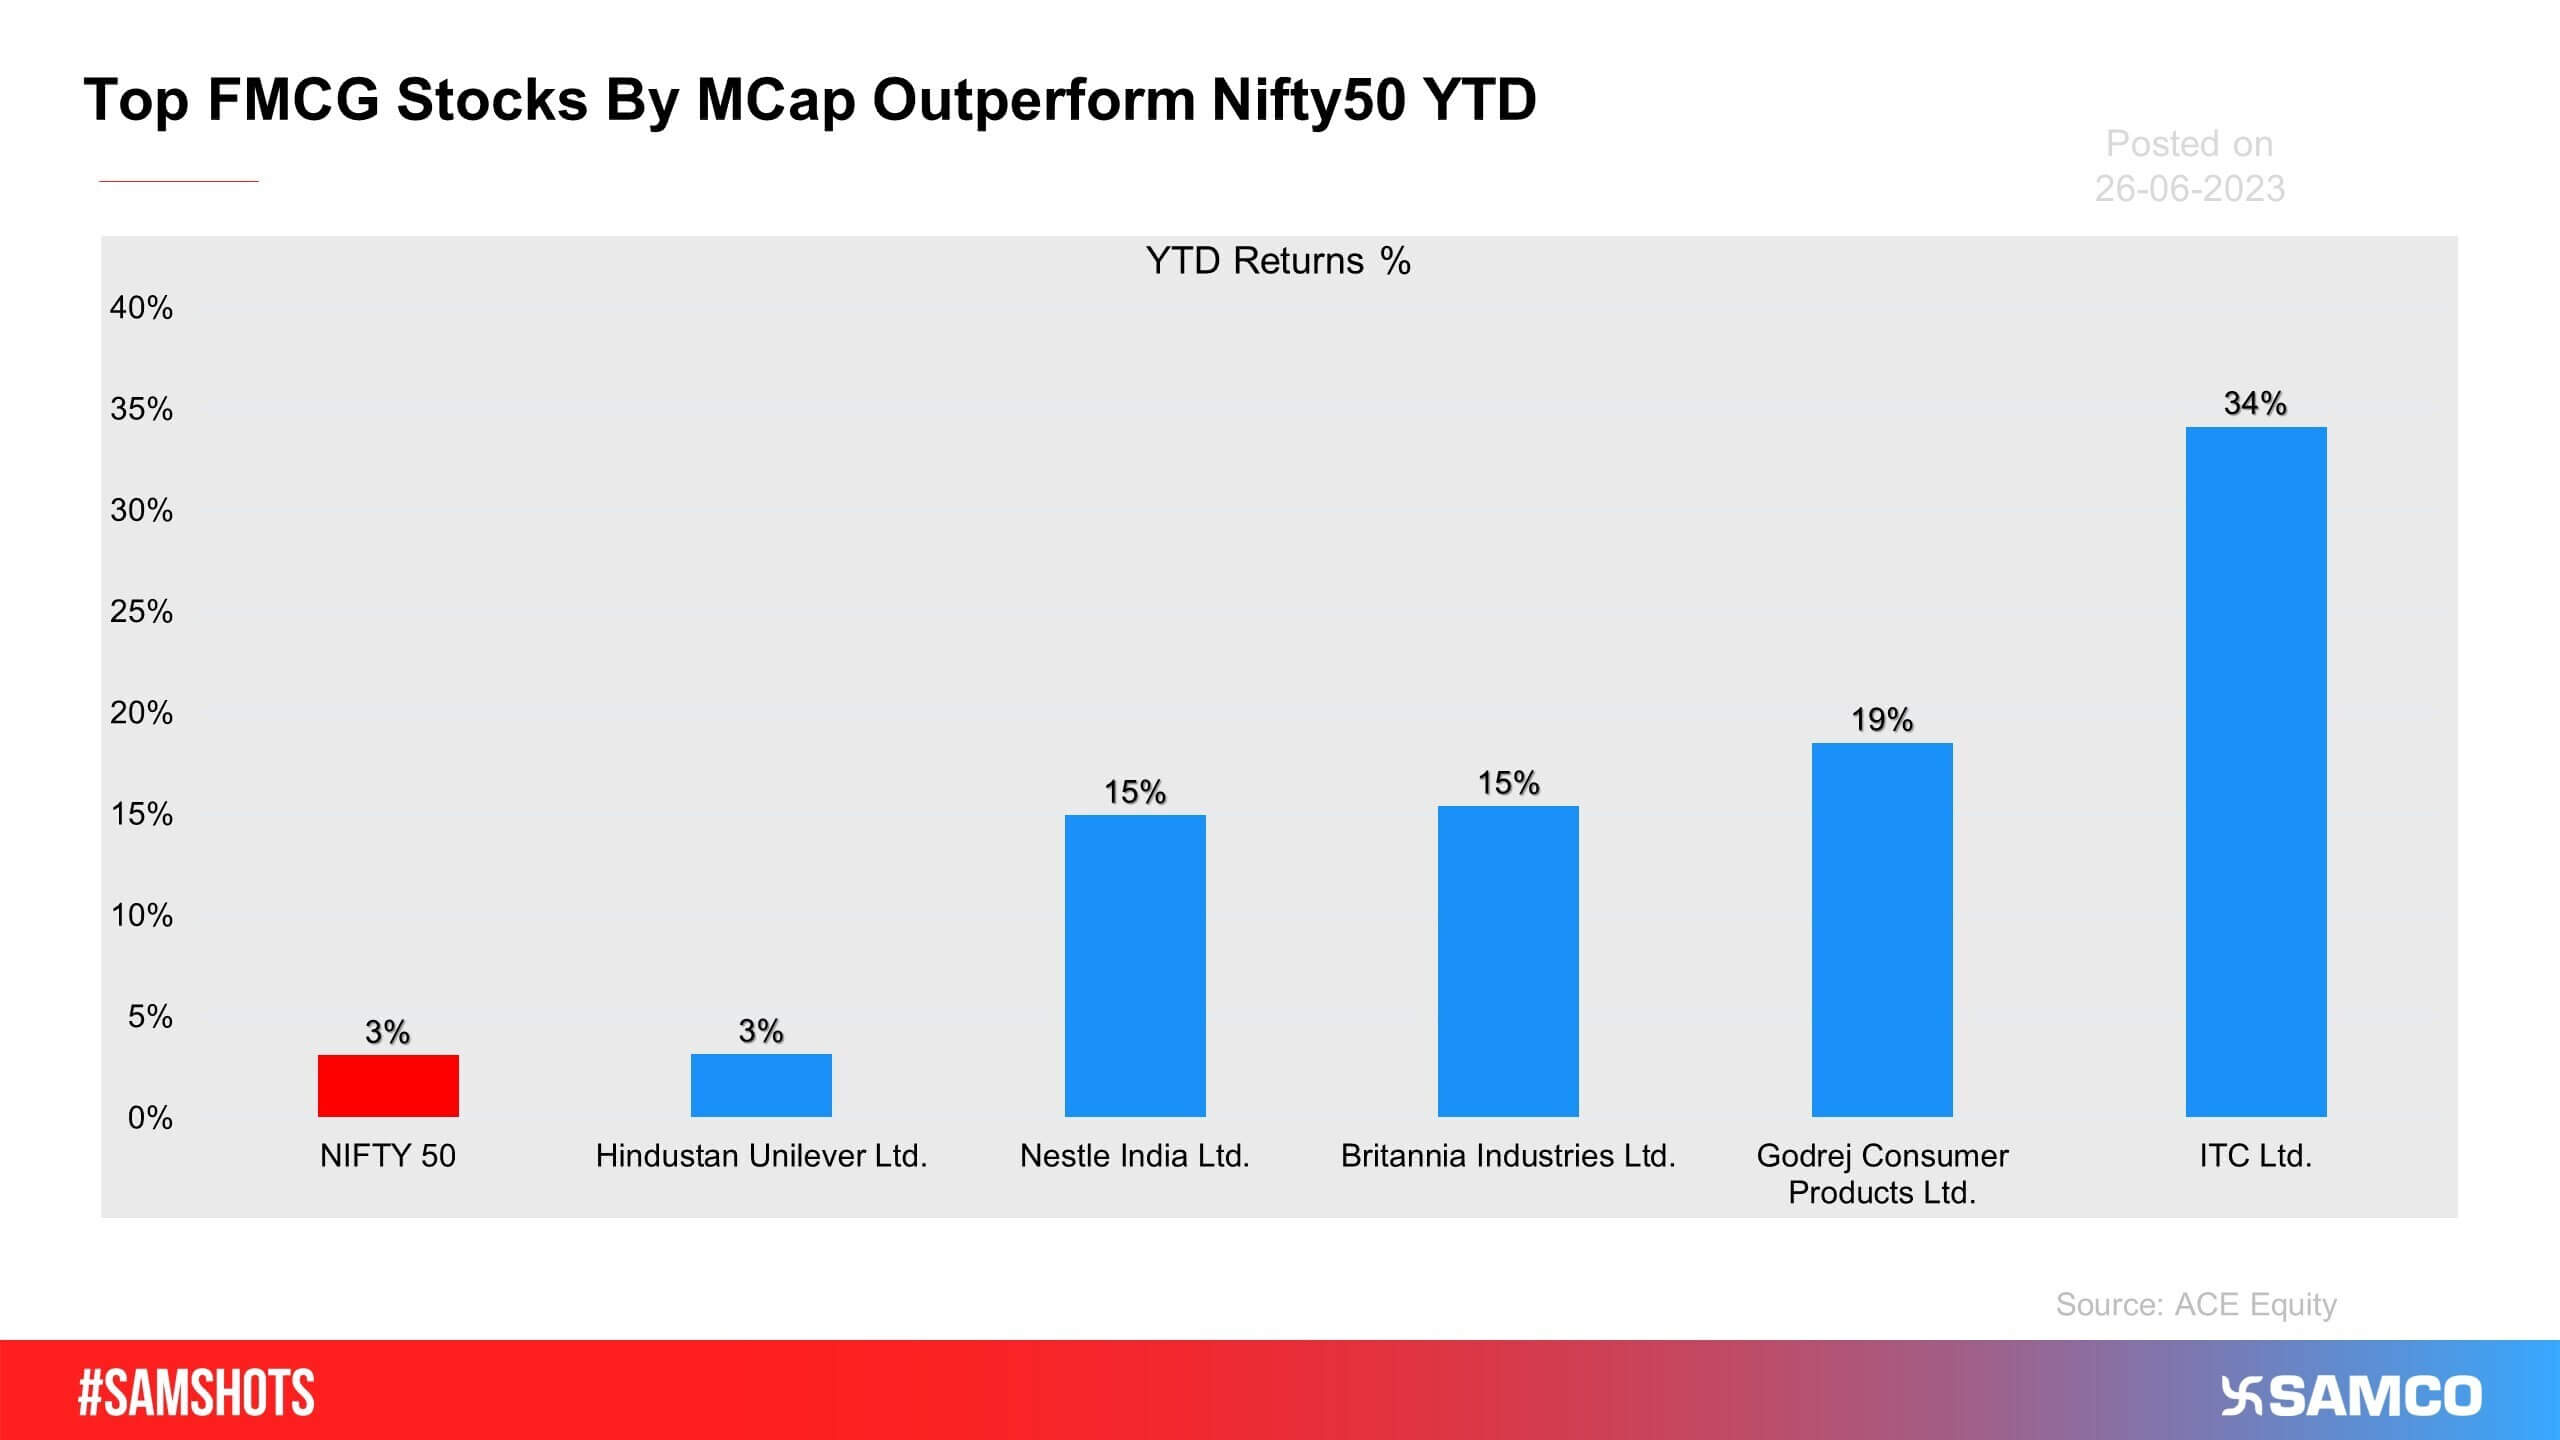 Most of the top Nifty FMCG Companies by MCap seems to have performed much better than the broader market index.